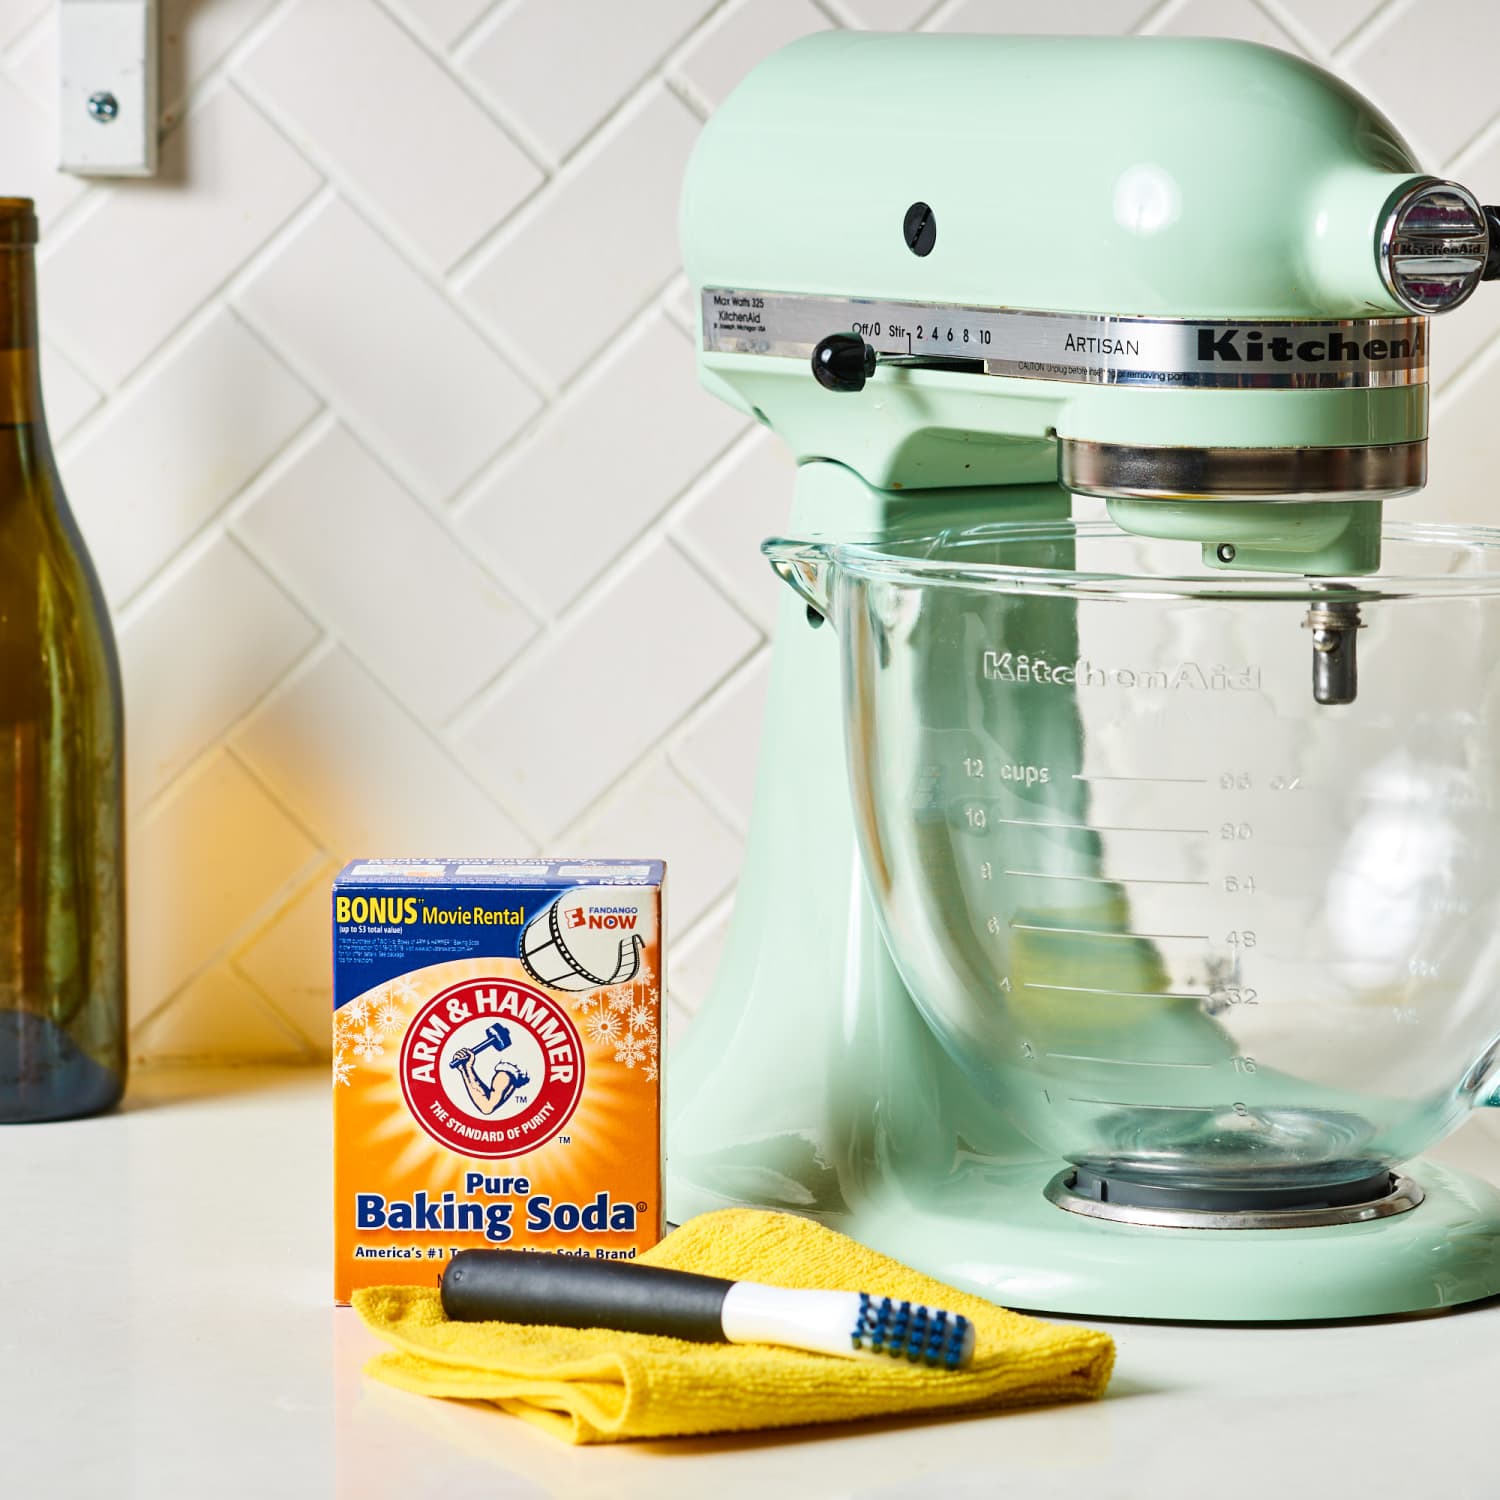 How to Clean a Commercial Stand Mixer